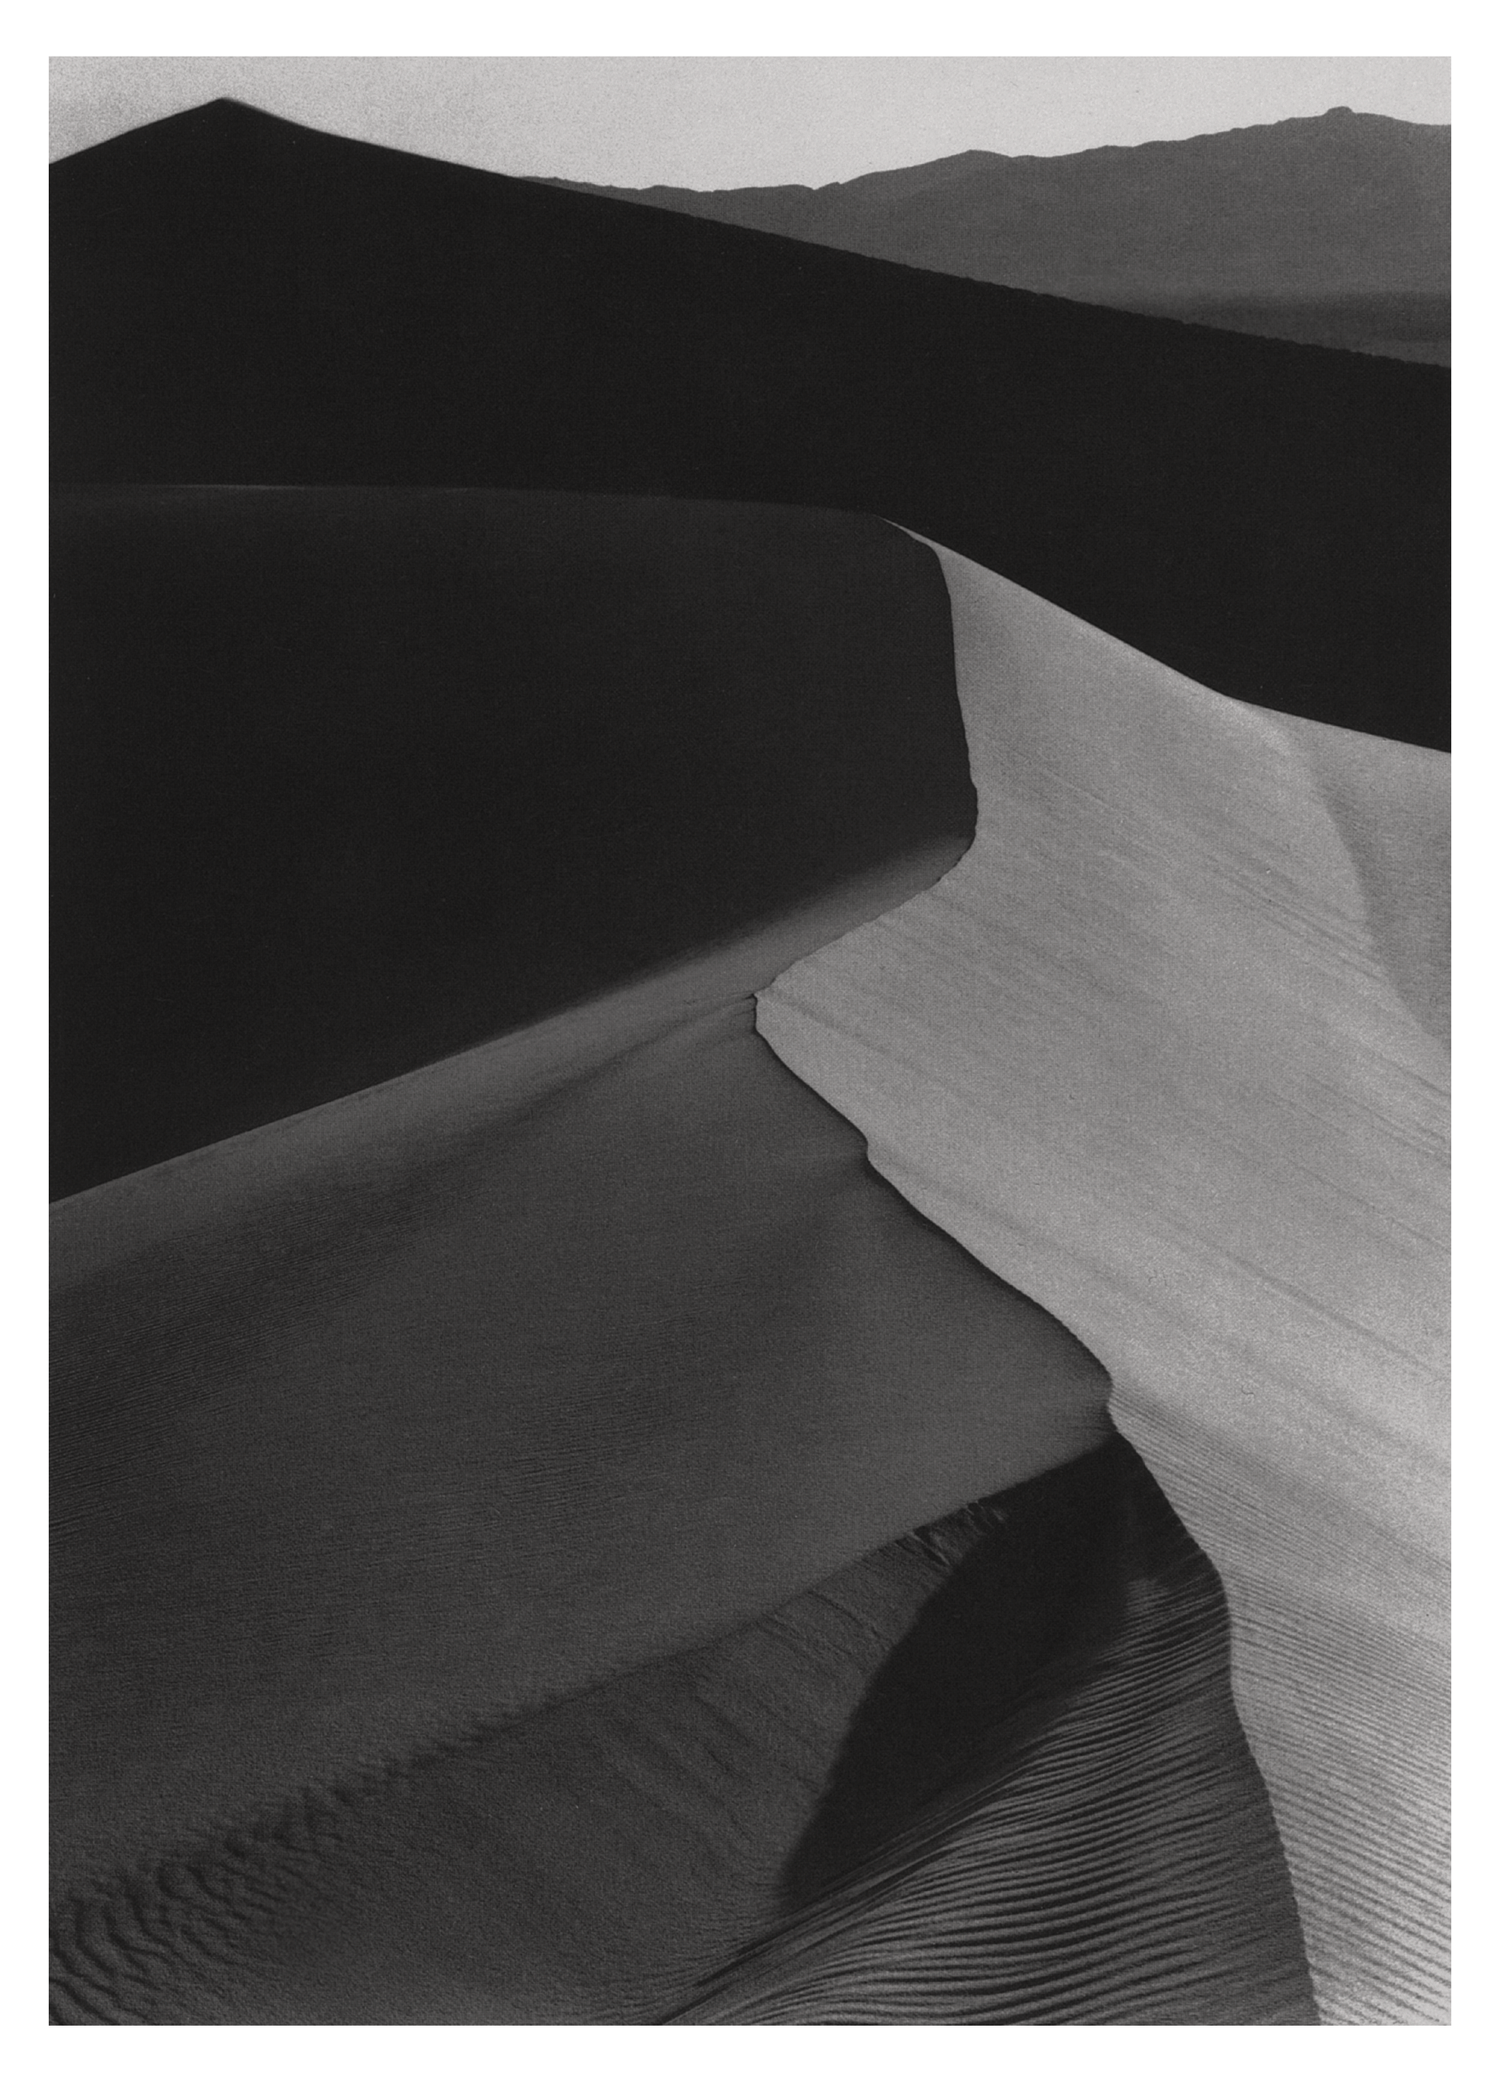 SAND DUNES, SUNRISE - ANSEL ADAMS SMALL MATTED REPRODUCTION